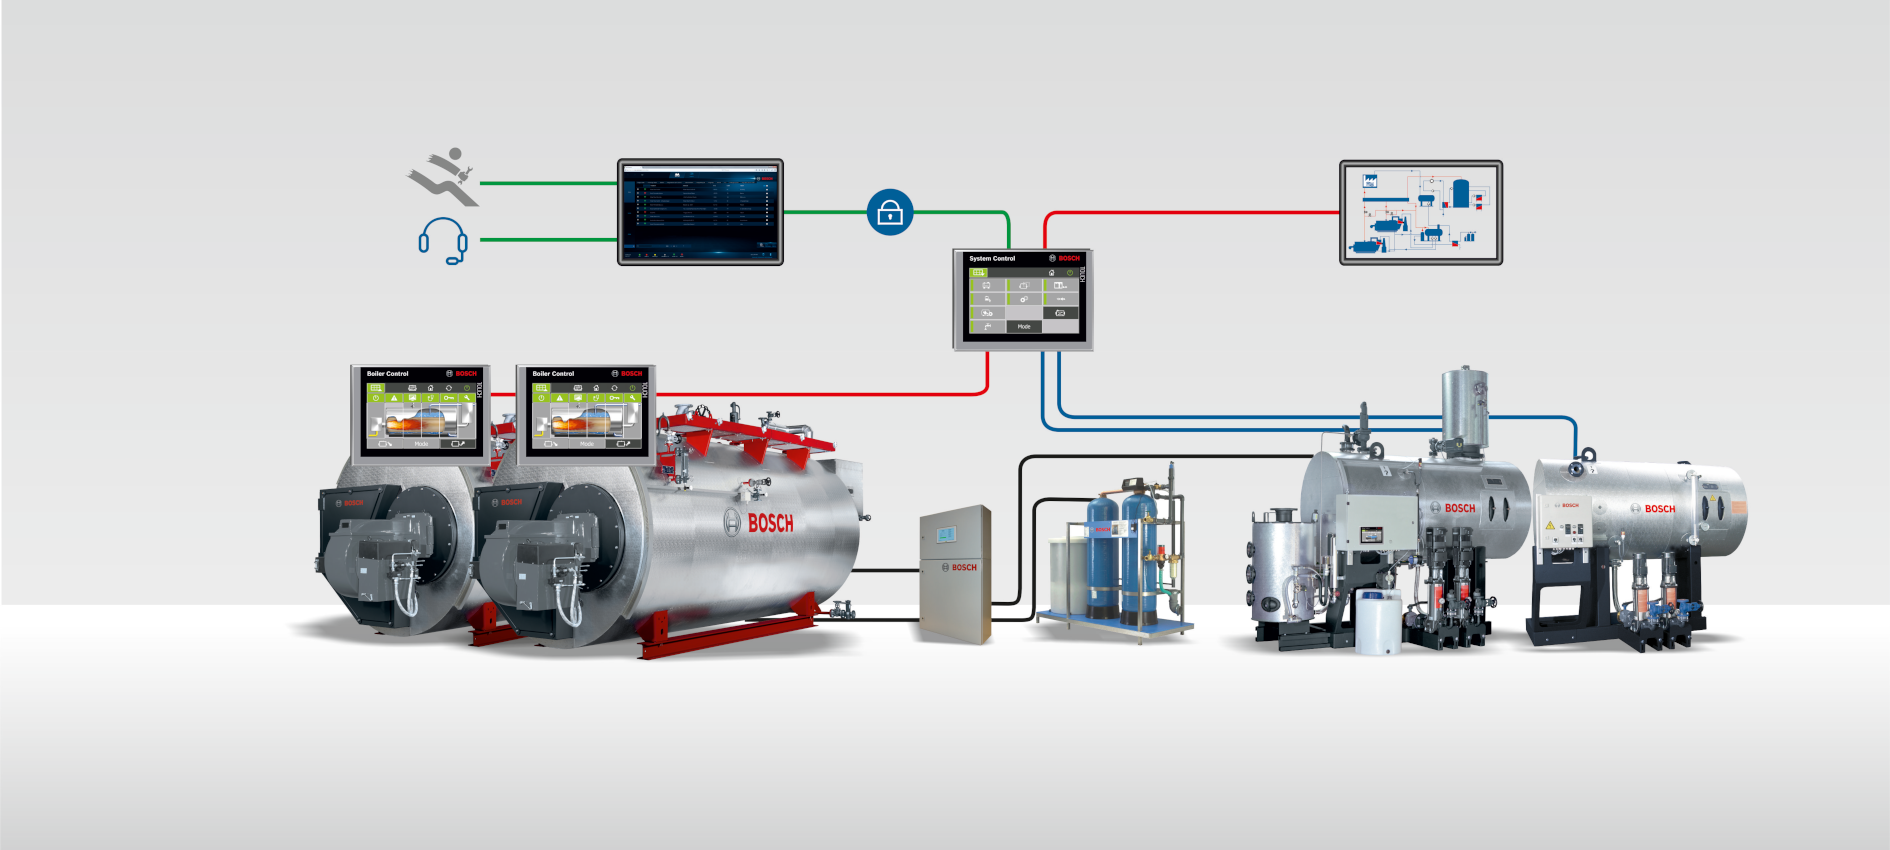 MEC Remote – remote access for maintenance and visualisation of system data